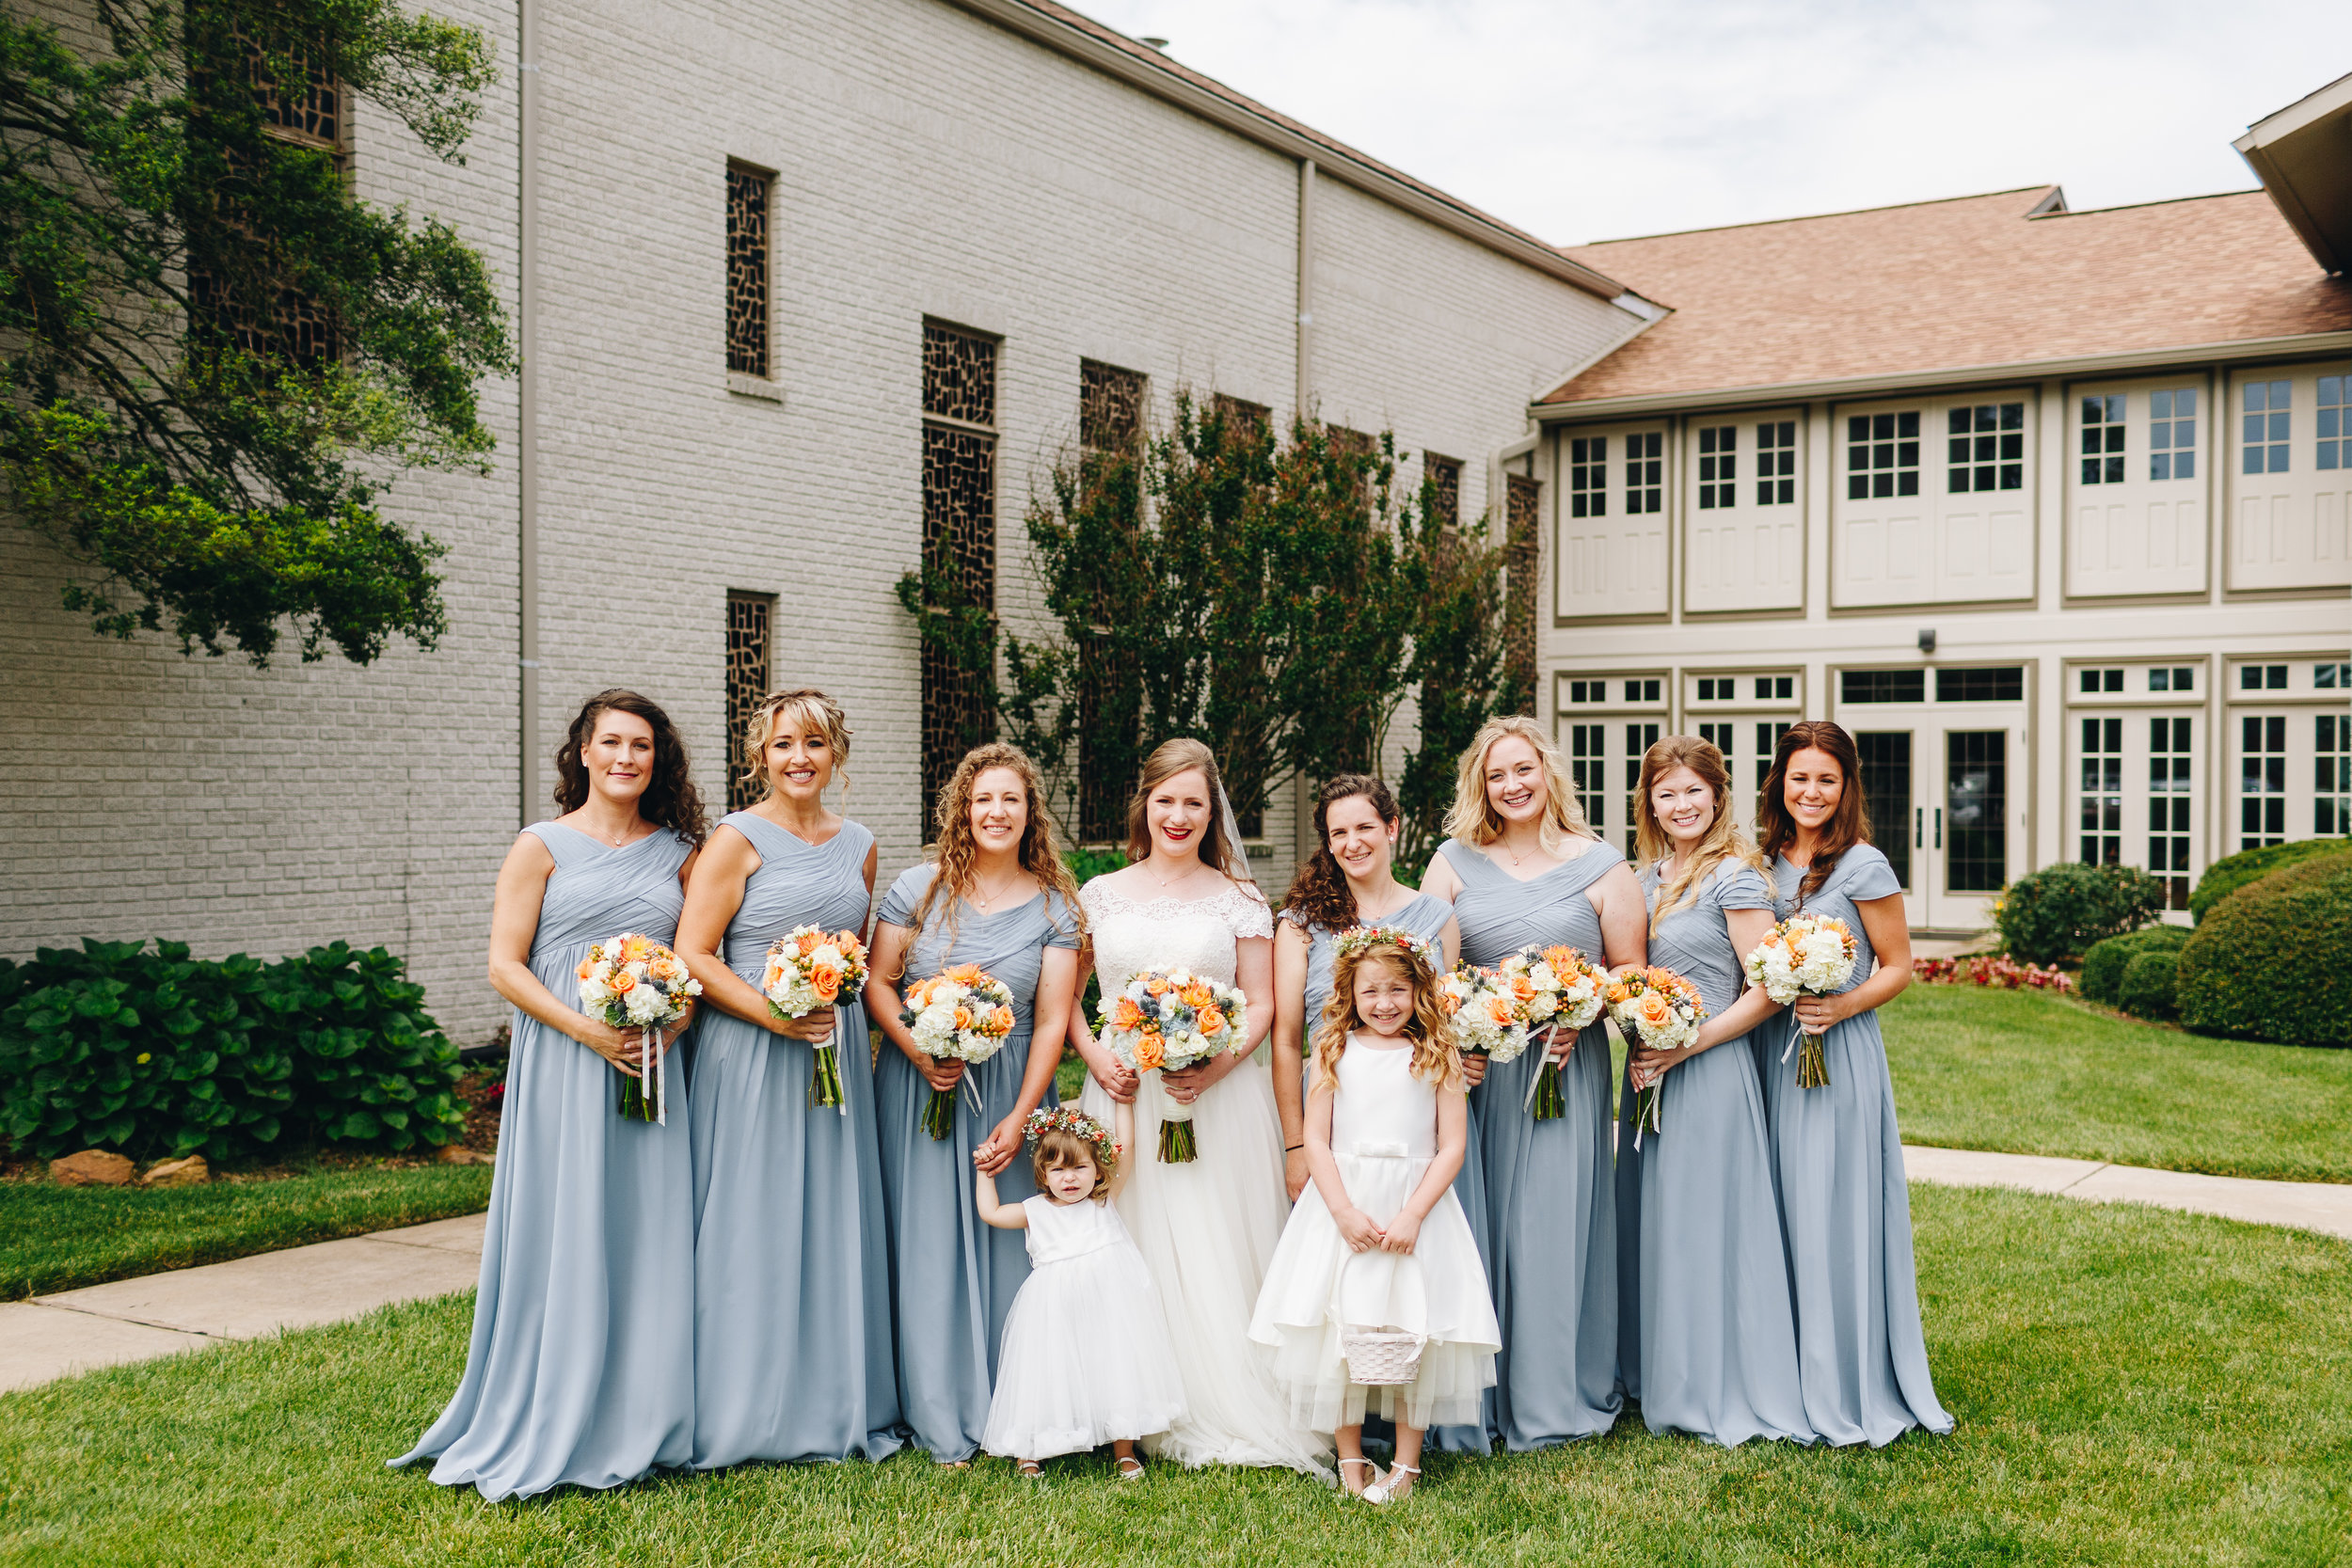 Bridesmaids portraits with steel blue dresses